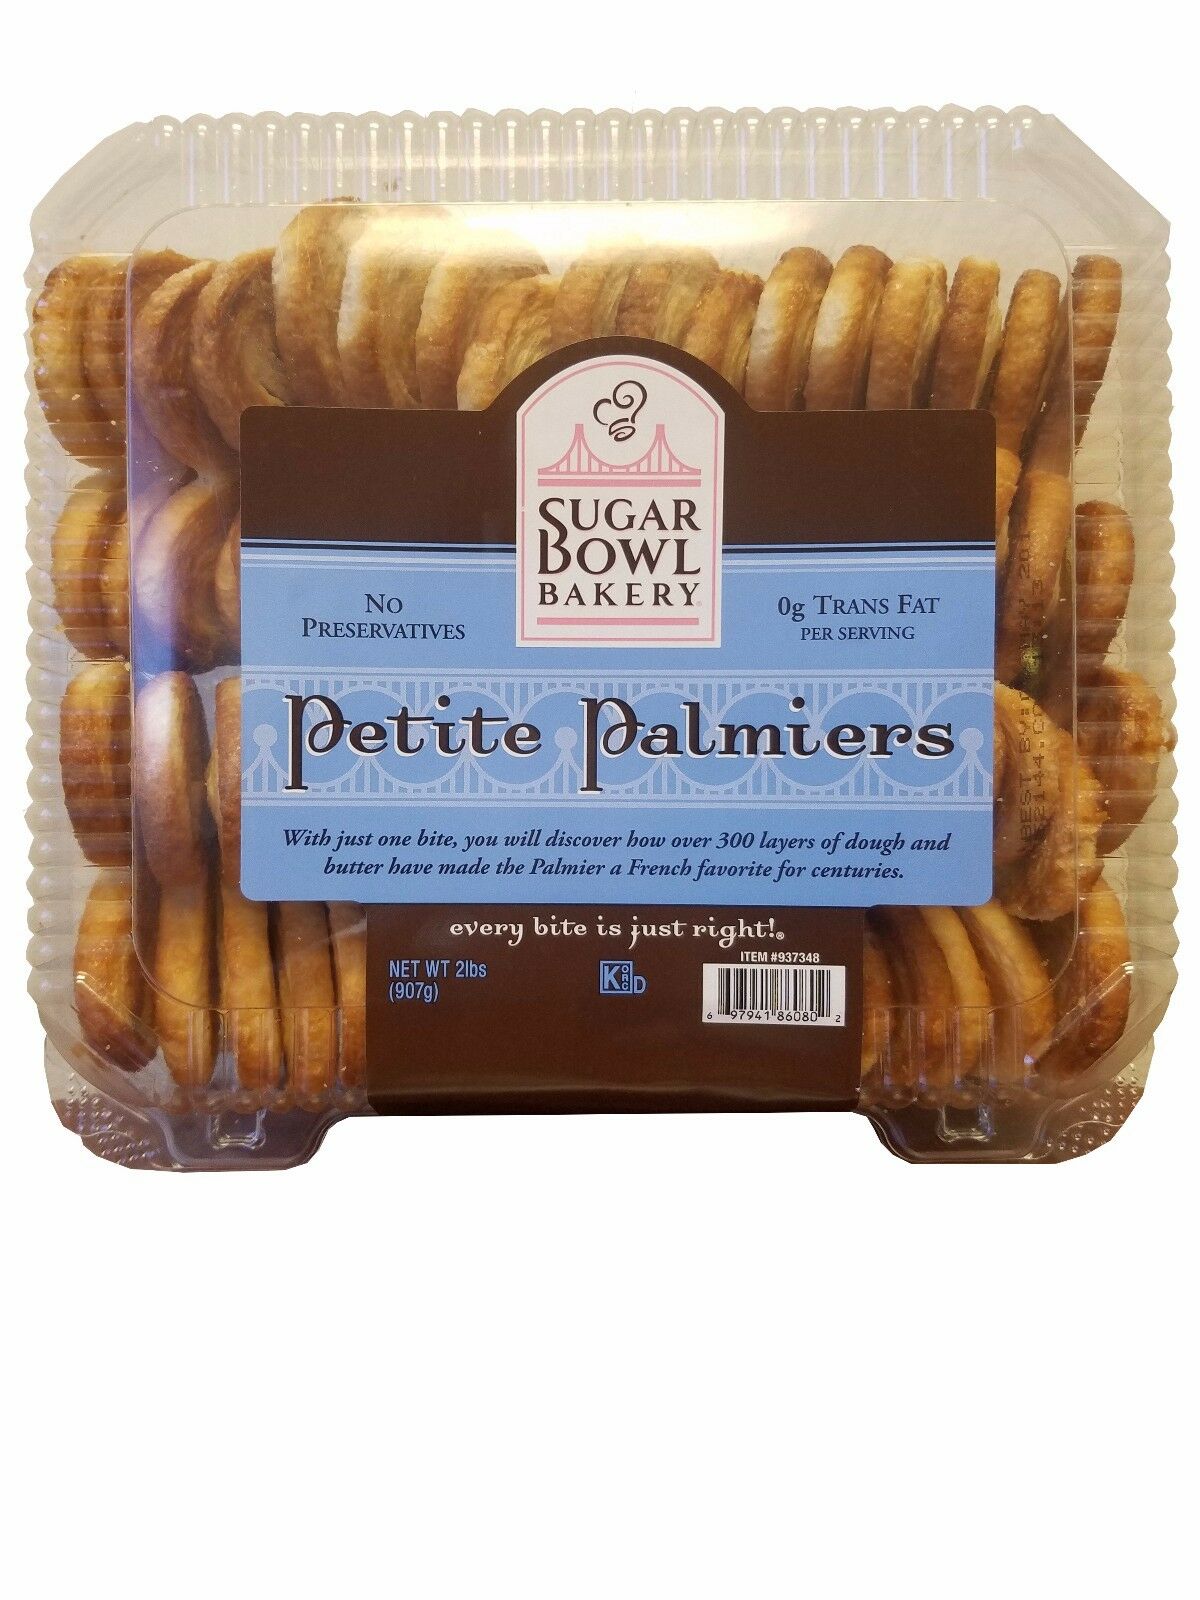 Sugar Bowl Bakery Petite Palmiers, French Style Favorite Cookies 2 Lb